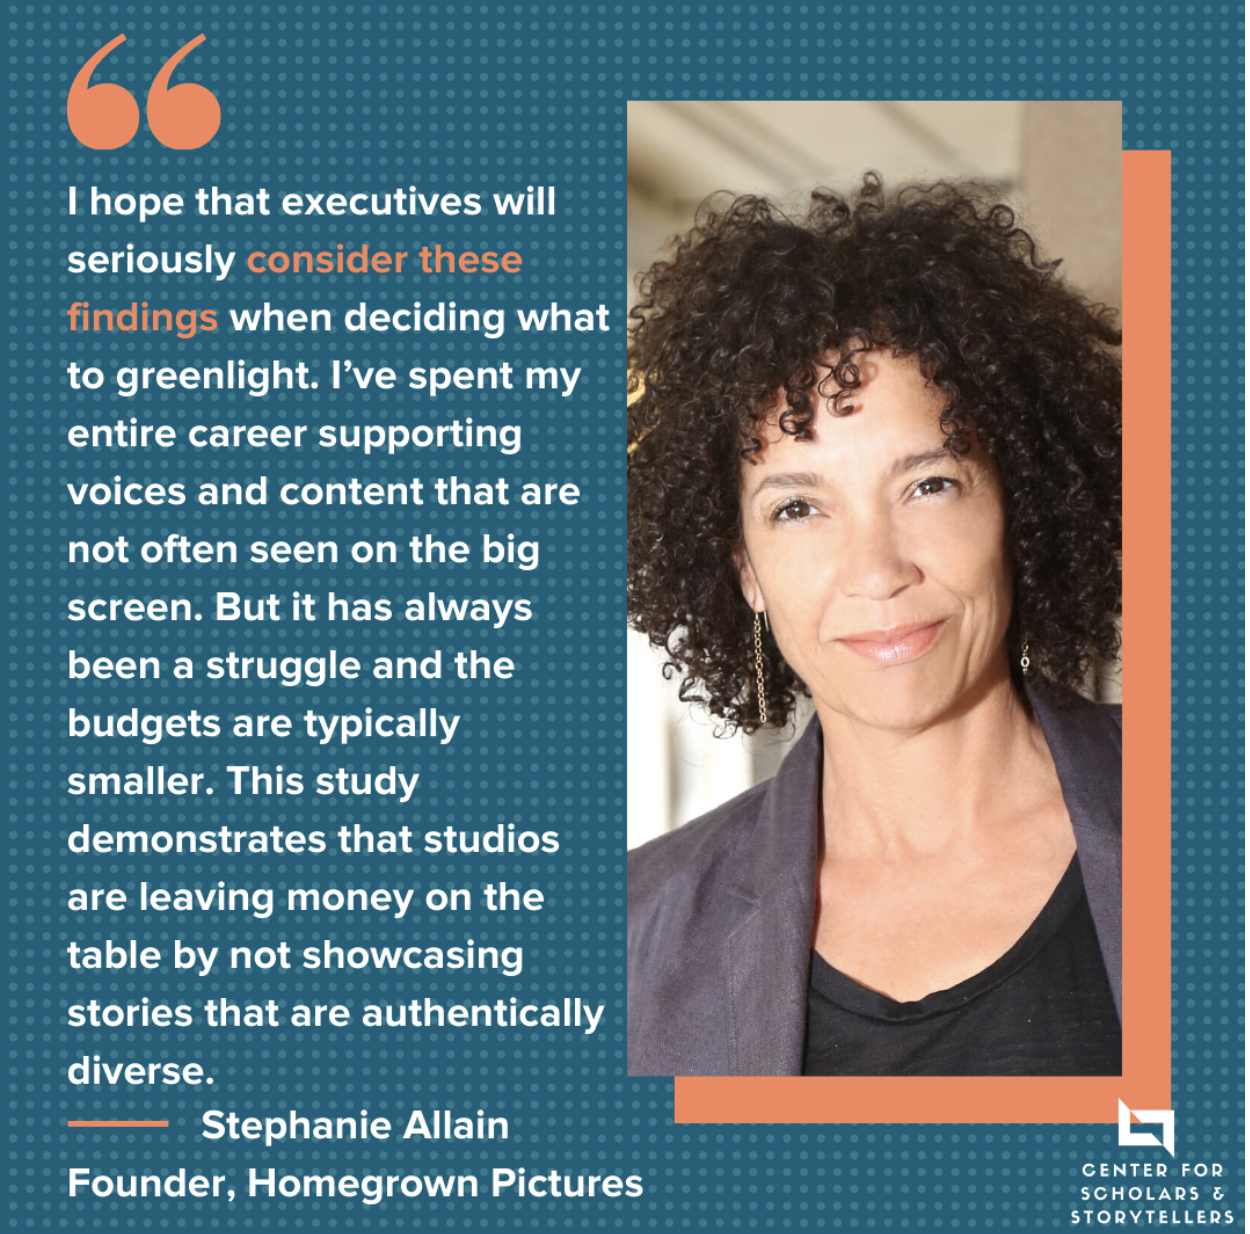 Graphic highlighting a portrait of and quote from Stephanie Allain, founder of Homegrown Pictures